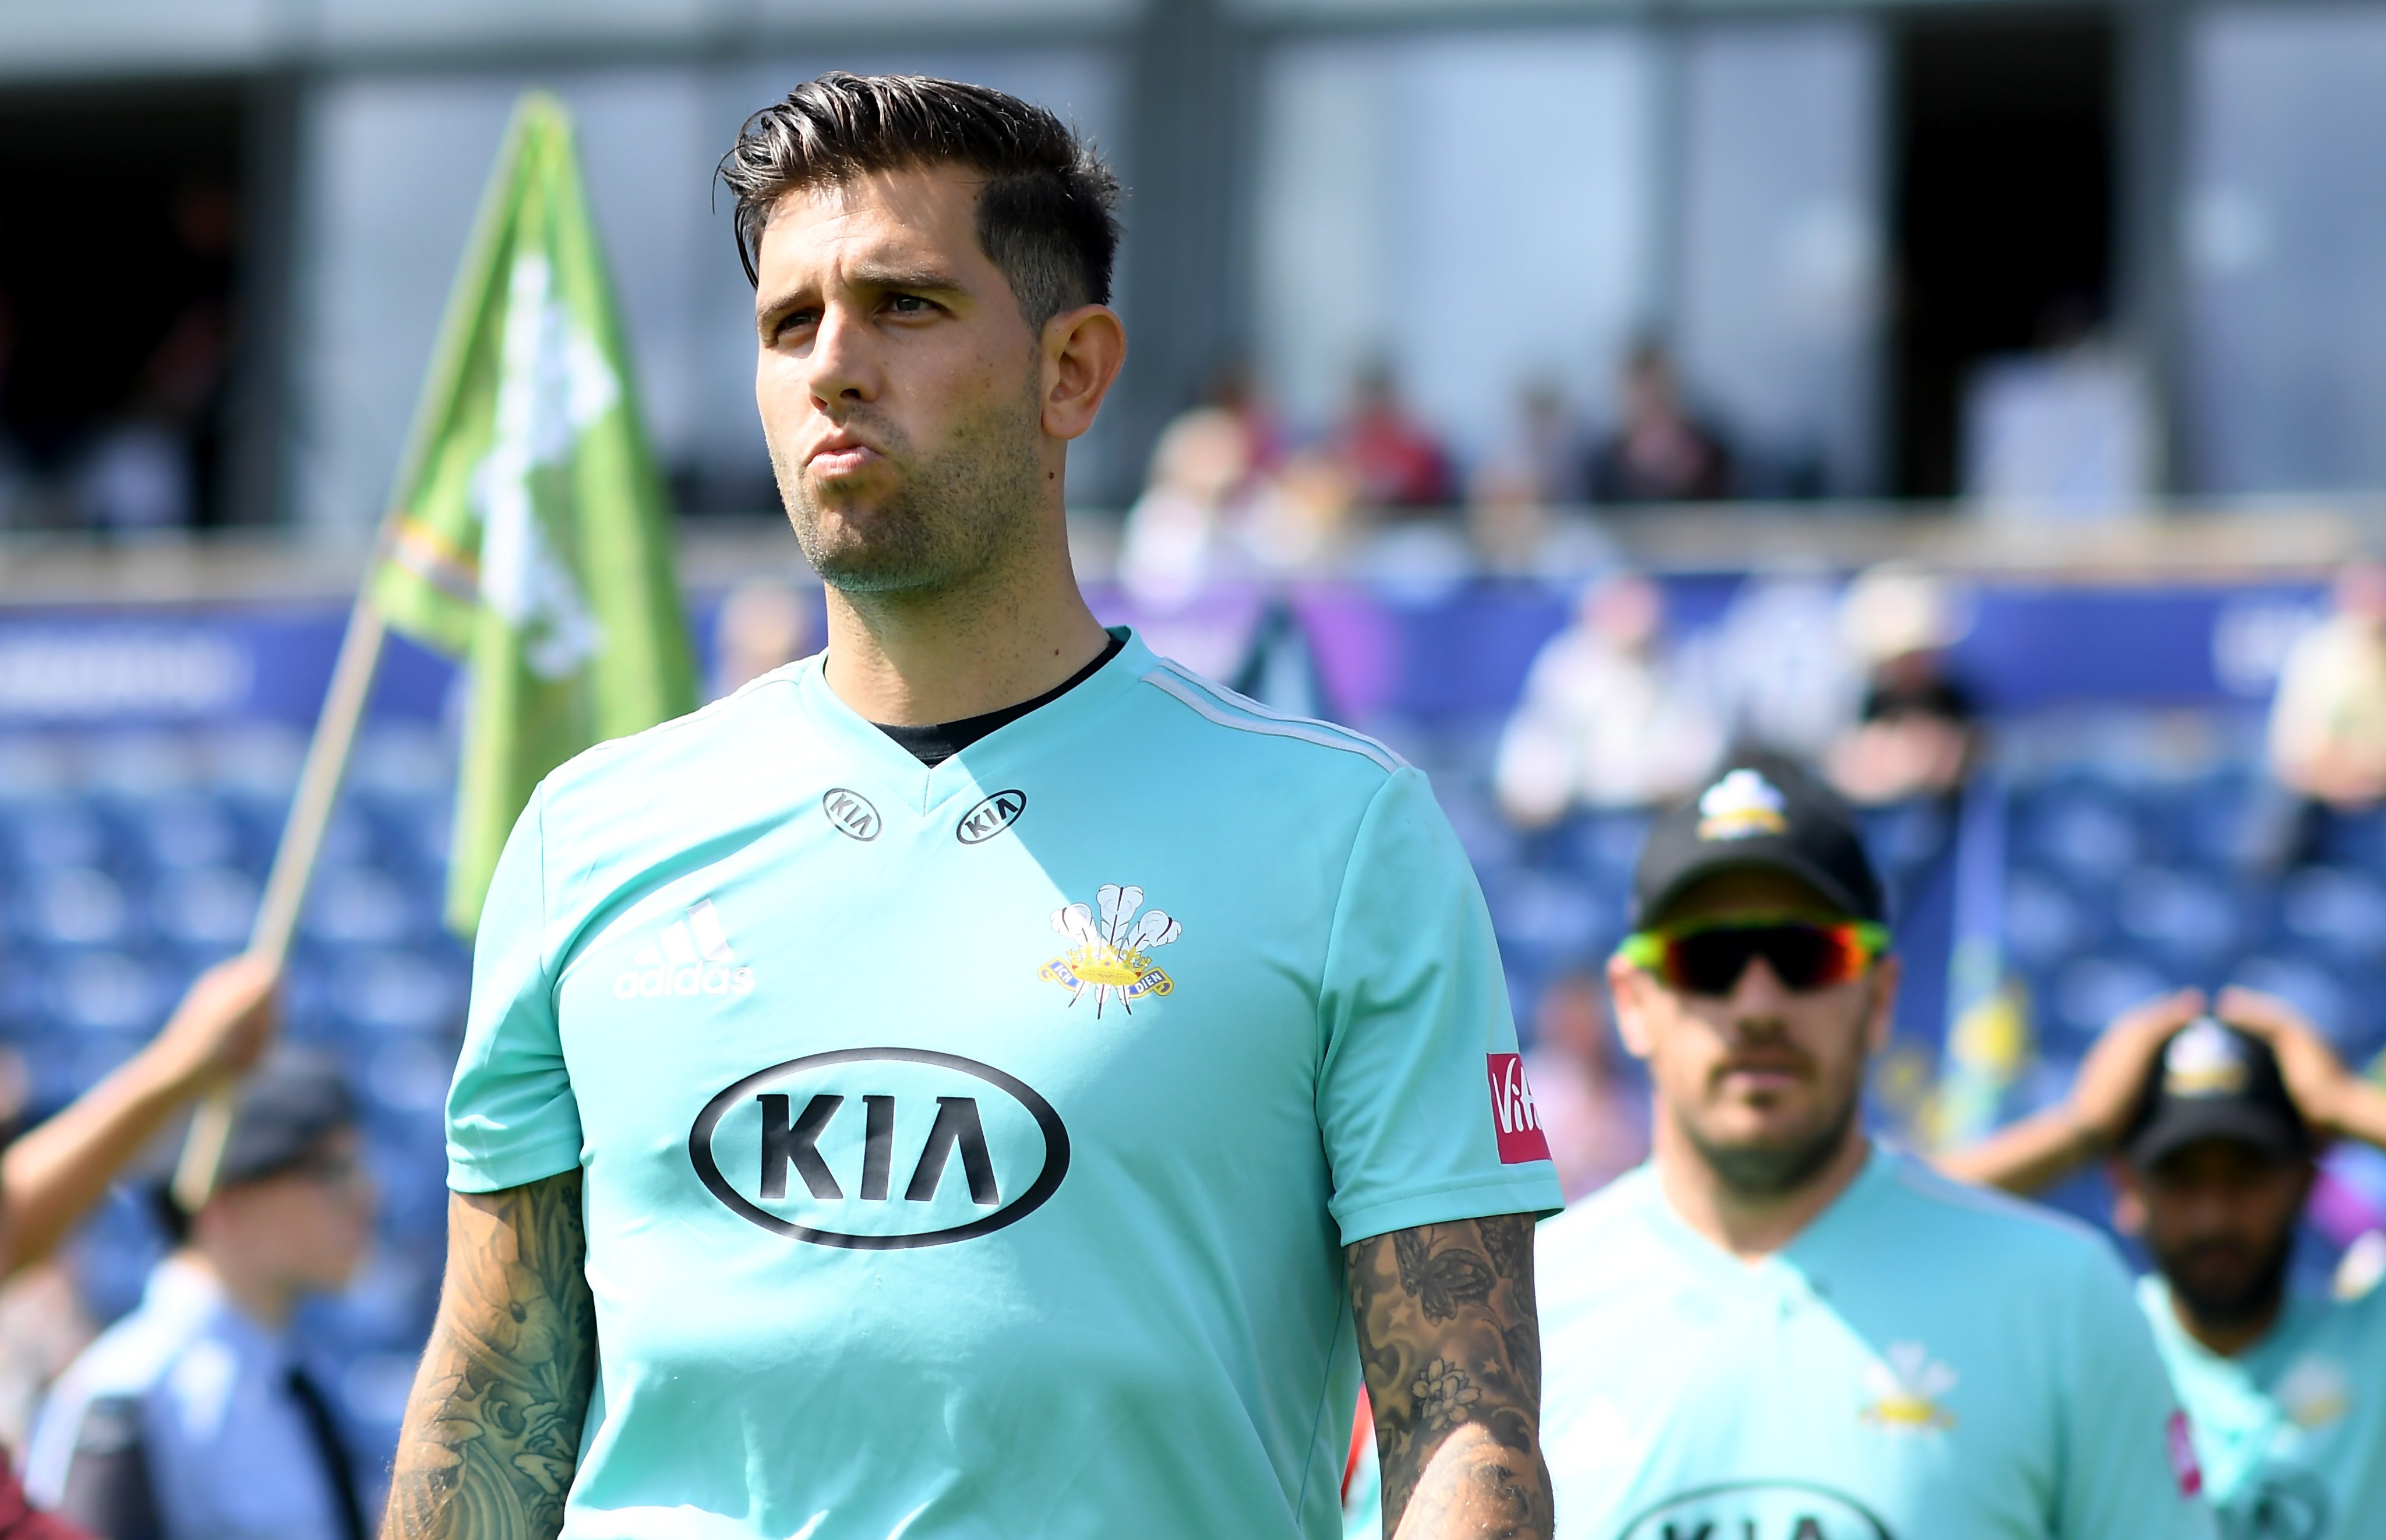 Former England quick Jade Dernbach set to play for Italy